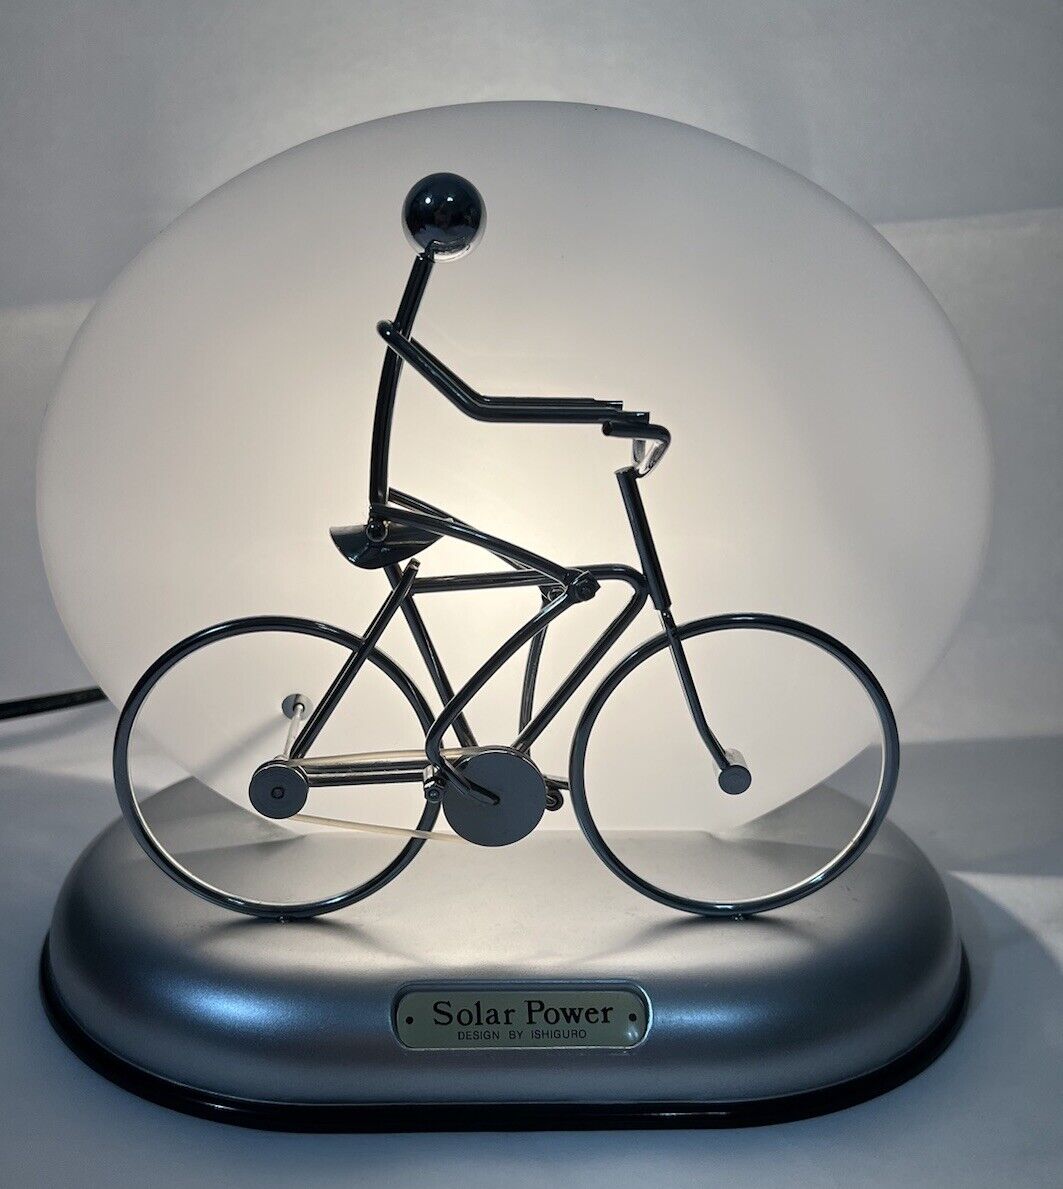 Bicycle Lamp Vintage Ishiguro Cyclist Biker Kinetic Sculpture With Solar Panel